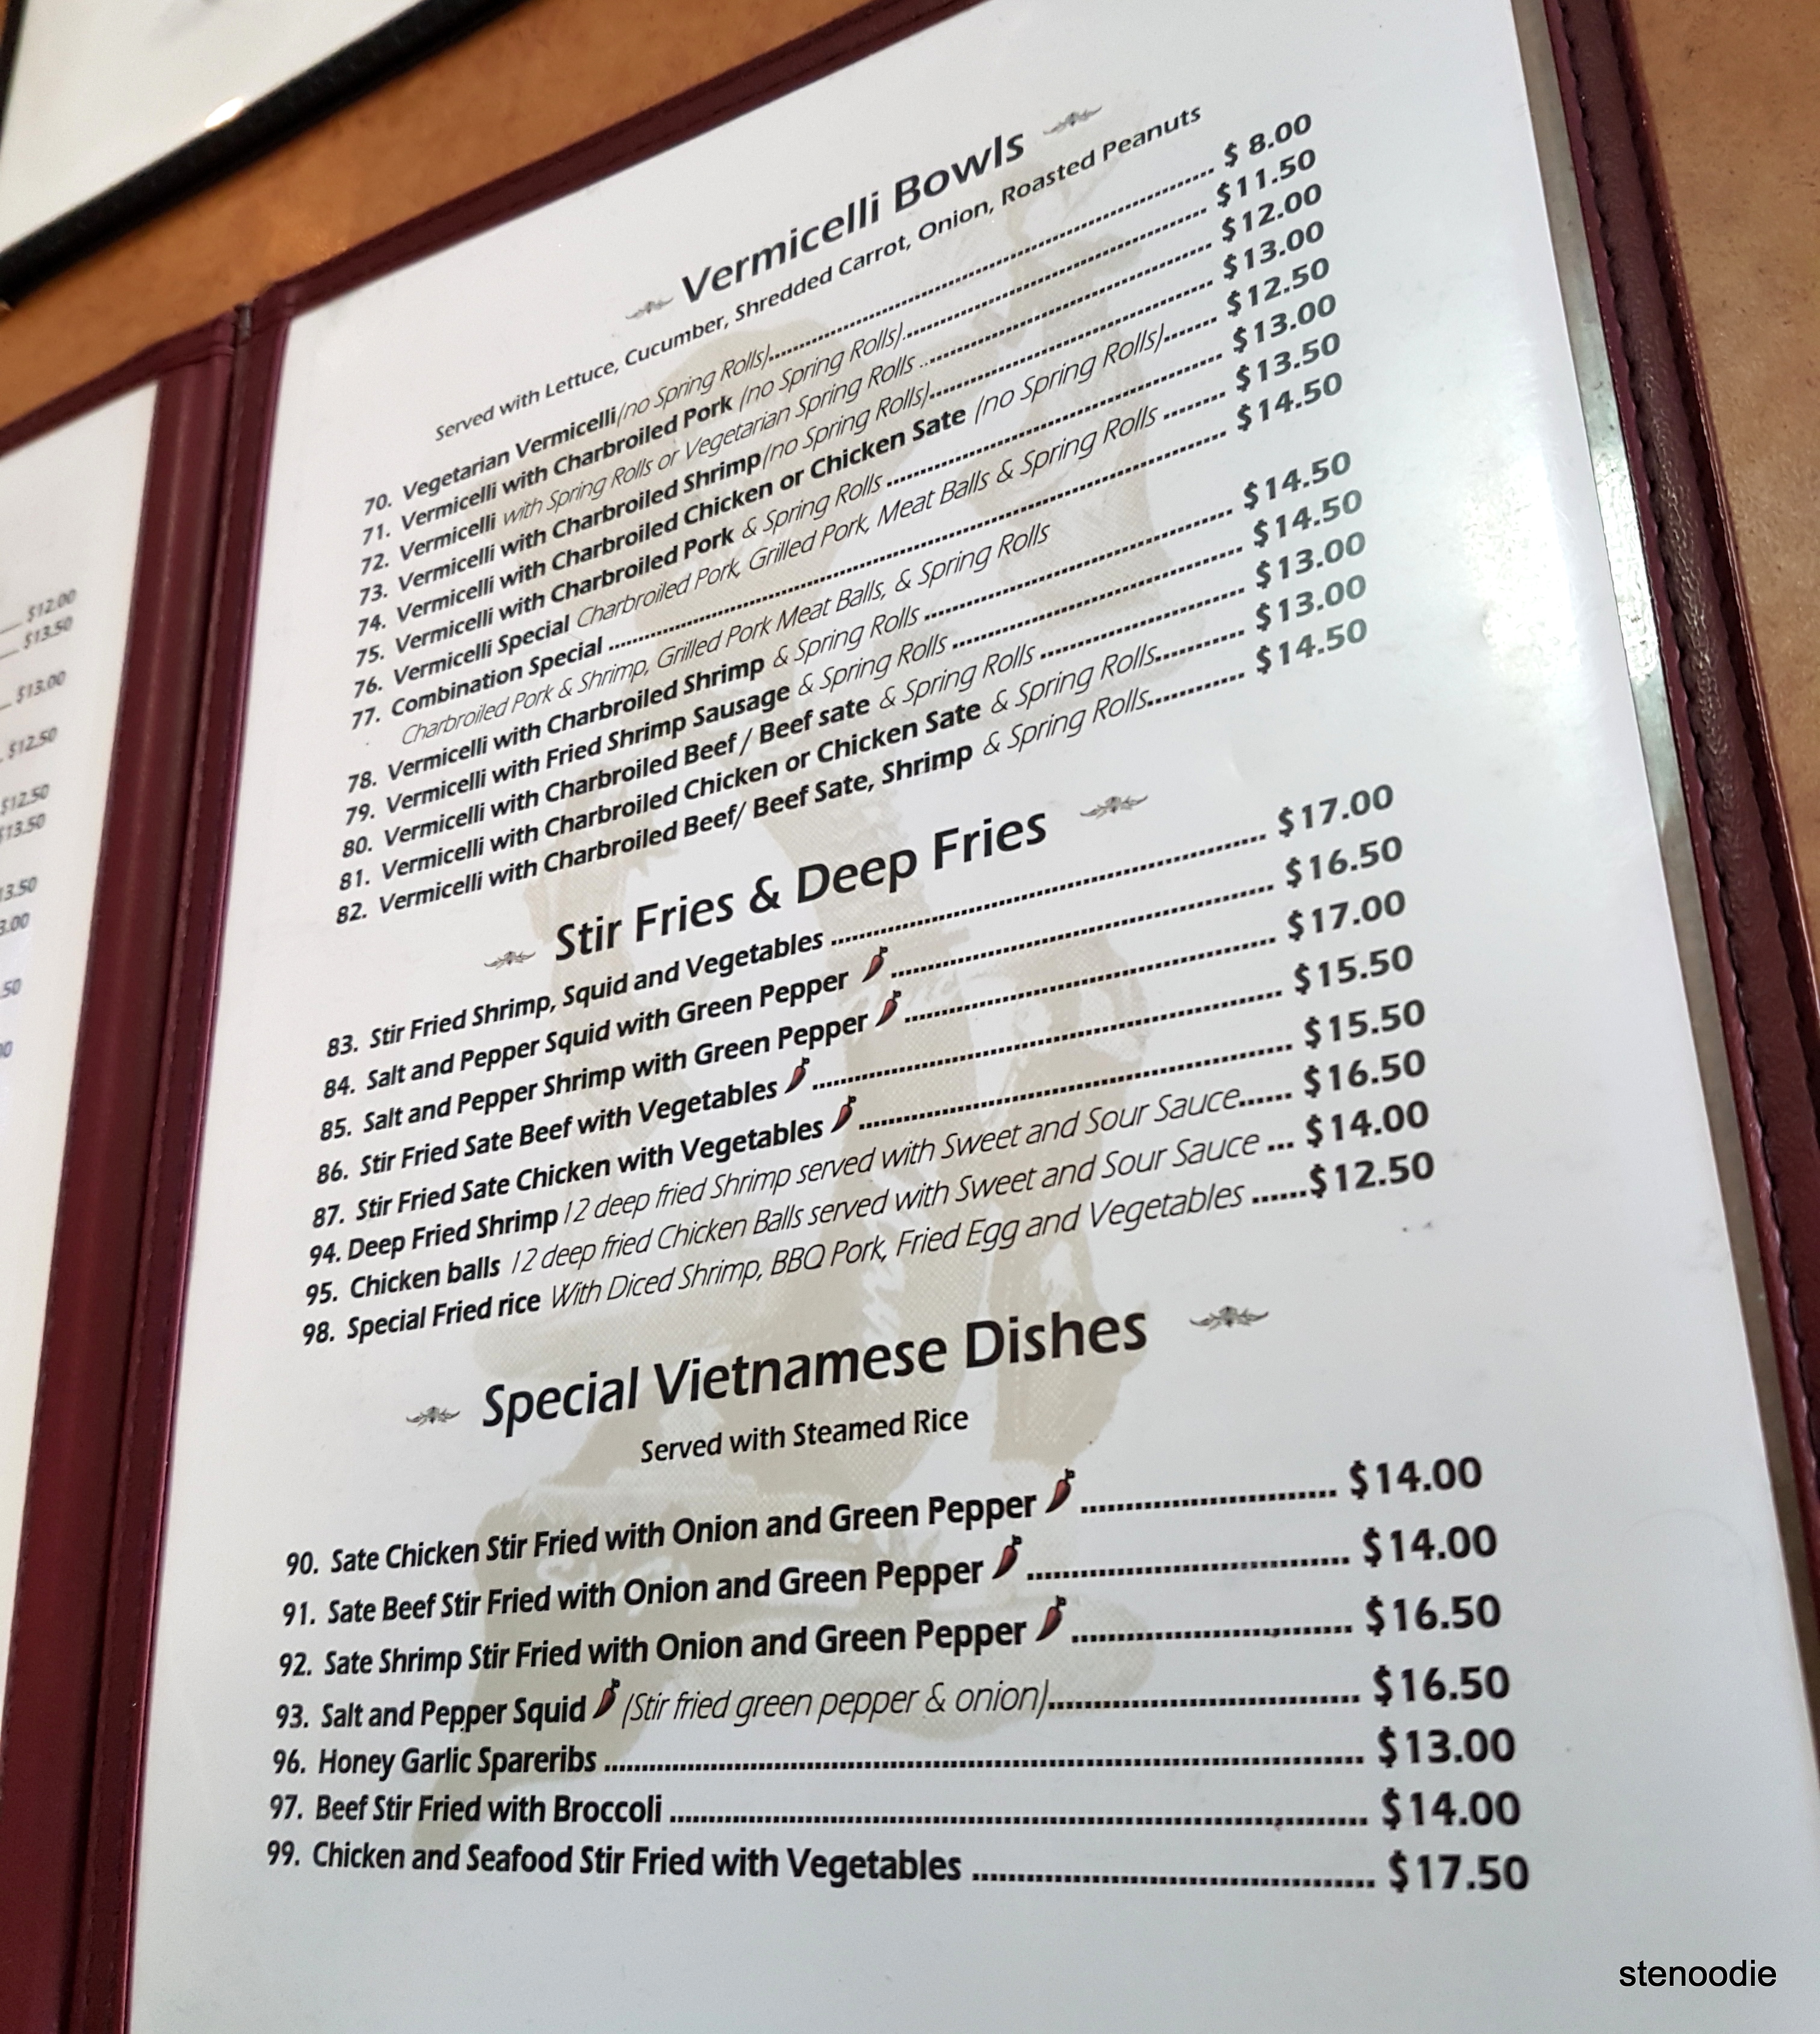 Vietnamese Noodle House menu and prices